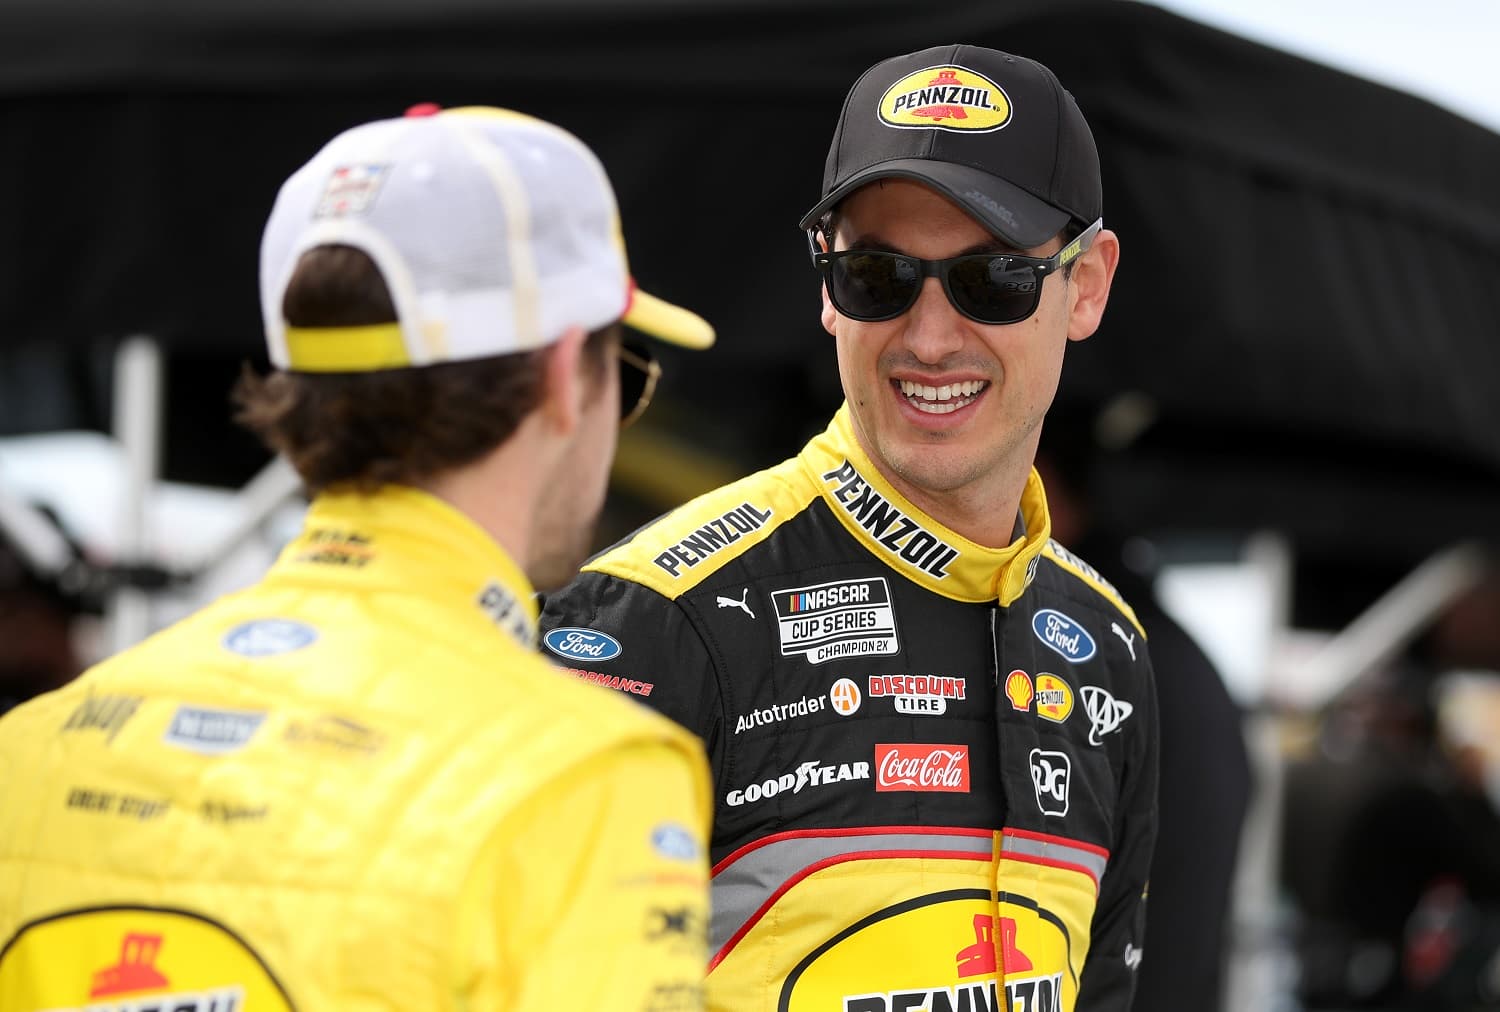 Joey Logano talks to Ryan Blaney on the grid during practice for the NASCAR Cup Series Pennzoil 400 at Las Vegas Motor Speedway on March 4, 2023.